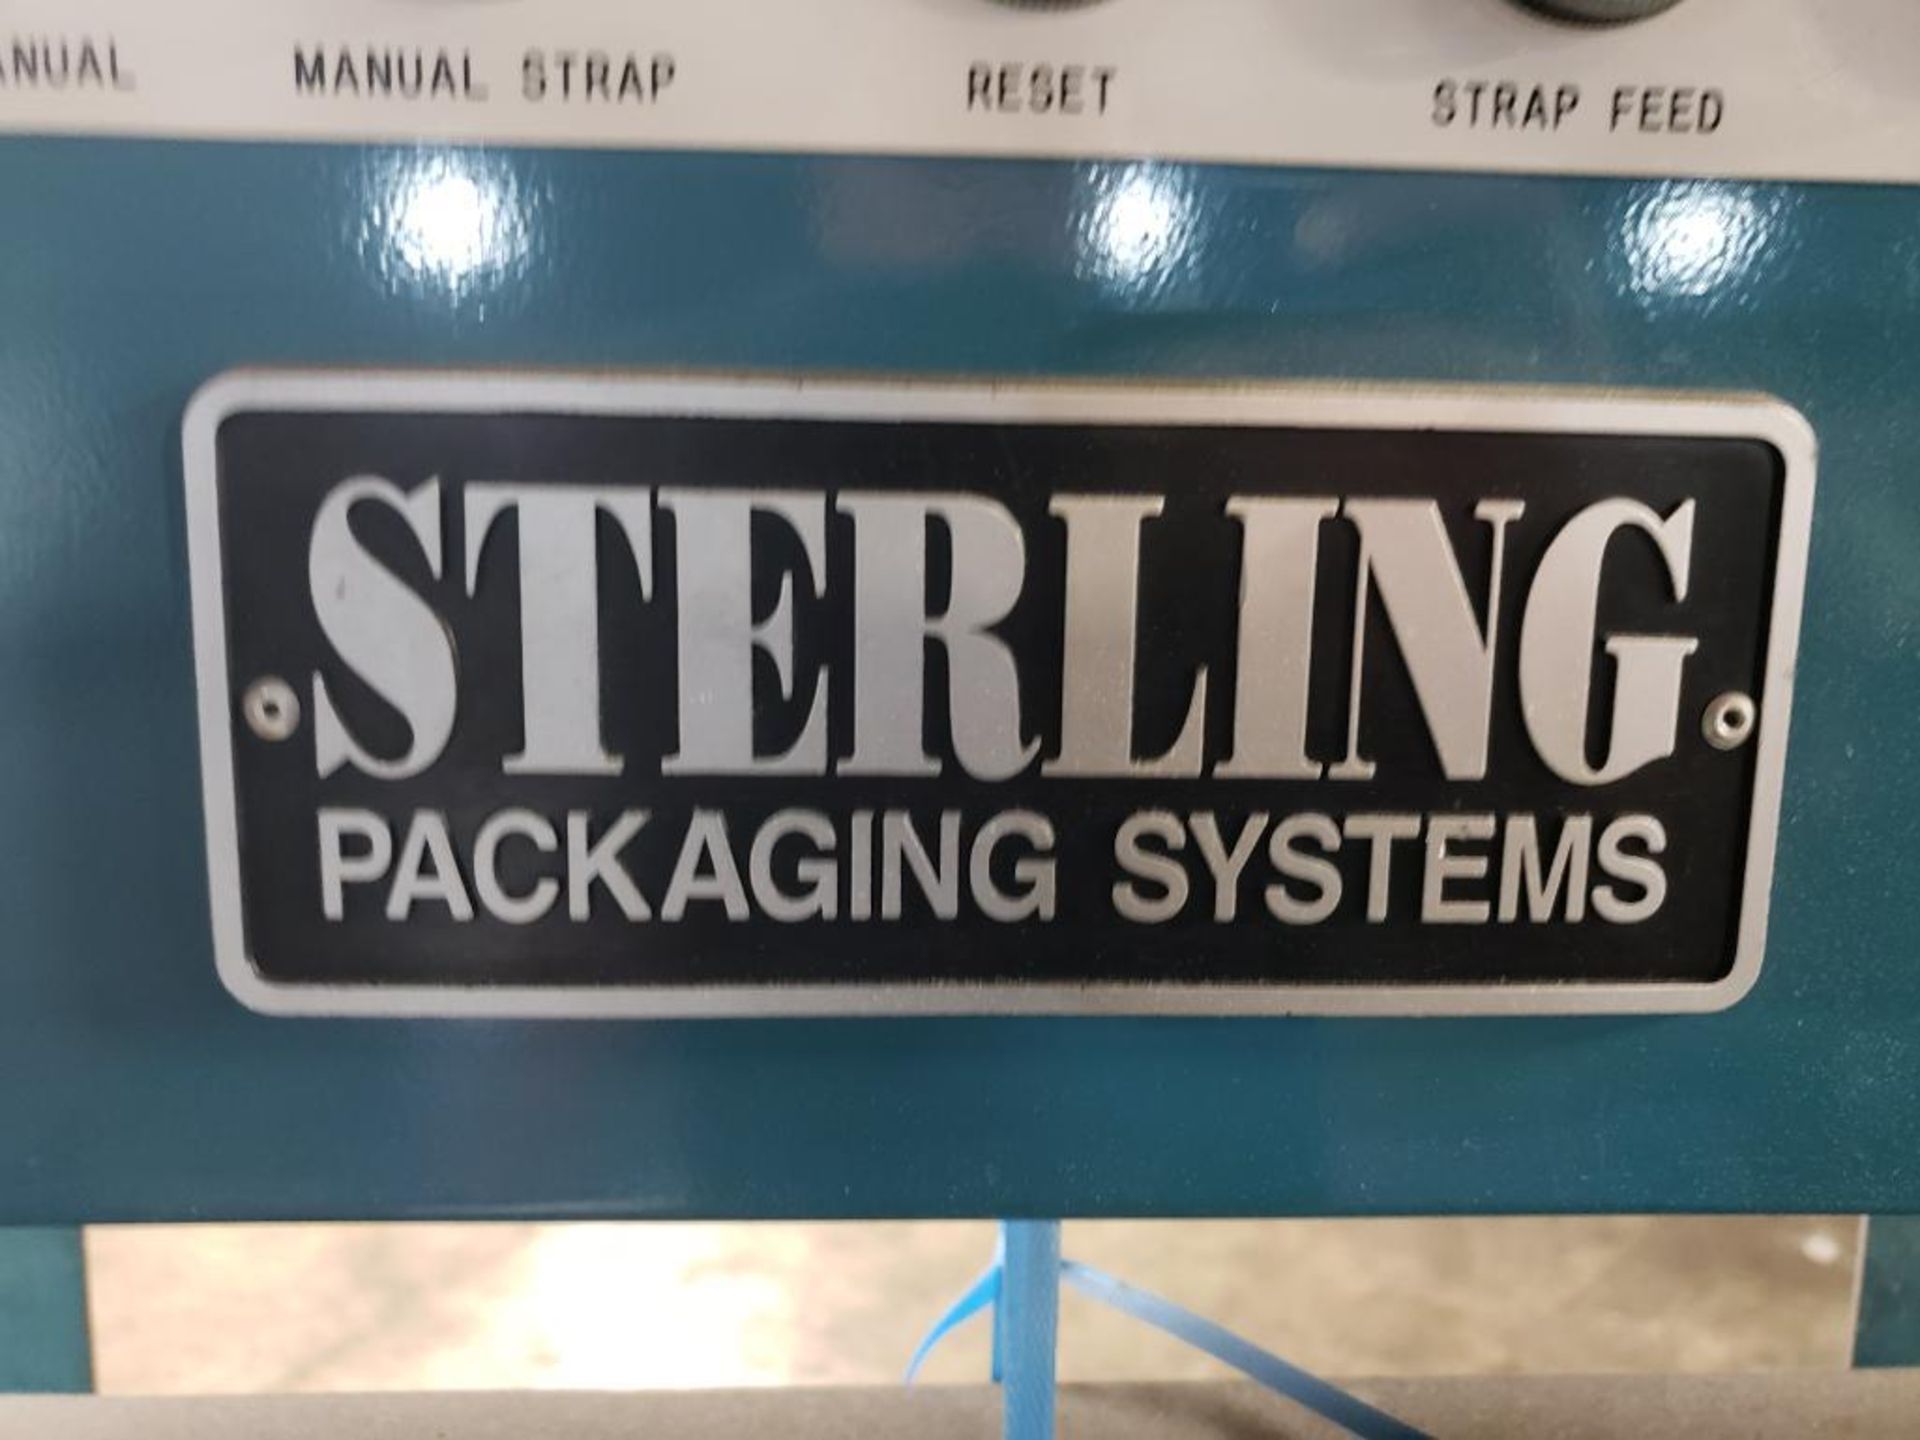 Sterling packaging systems automatic banding machine. Model MR45CH. - Image 2 of 10